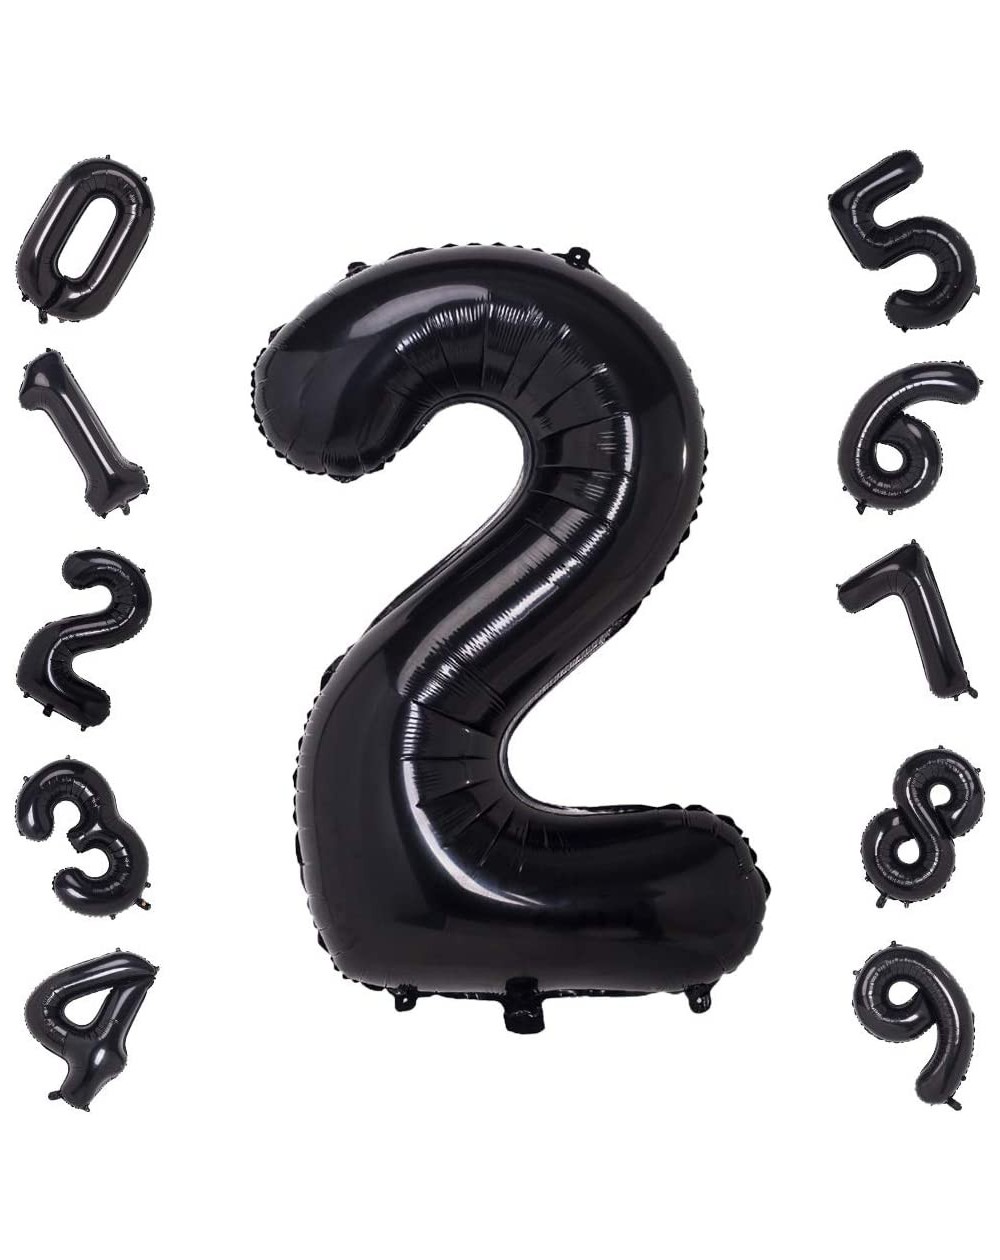 Balloons 40 Inch Black Big Number 2 Balloon Birthday Party Decorations Helium Foil Mylar Number Balloon Digital 2 - Black 2 -...